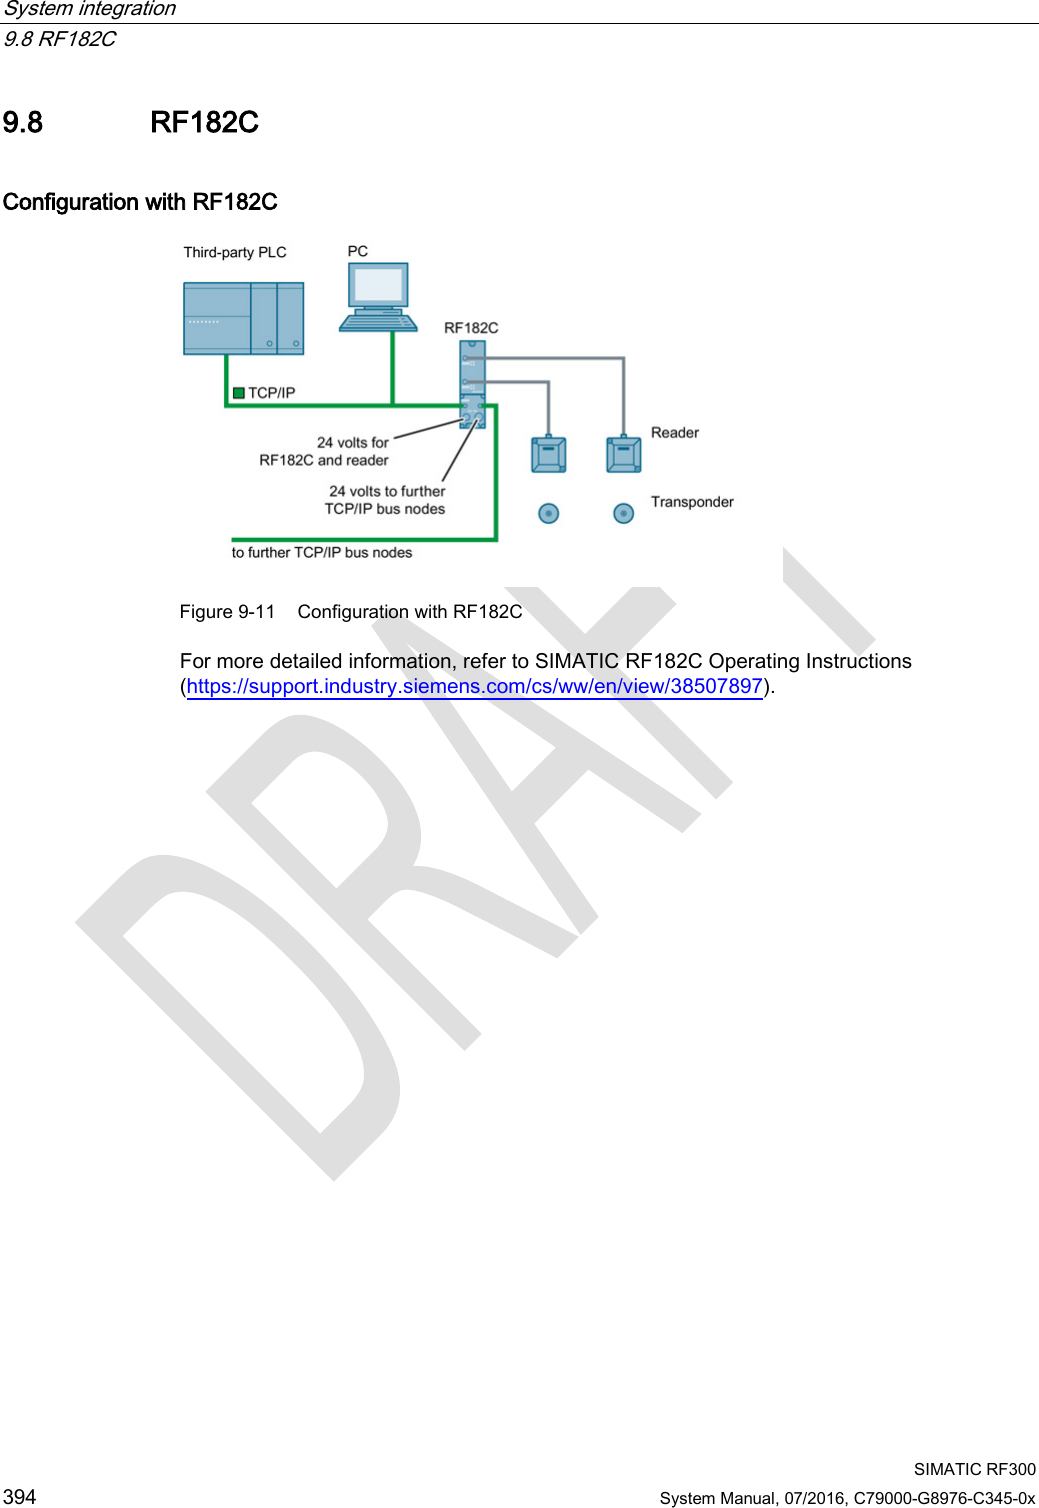 System integration   9.8 RF182C  SIMATIC RF300 394 System Manual, 07/2016, C79000-G8976-C345-0x 9.8 RF182C Configuration with RF182C  Figure 9-11 Configuration with RF182C For more detailed information, refer to SIMATIC RF182C Operating Instructions (https://support.industry.siemens.com/cs/ww/en/view/38507897). 